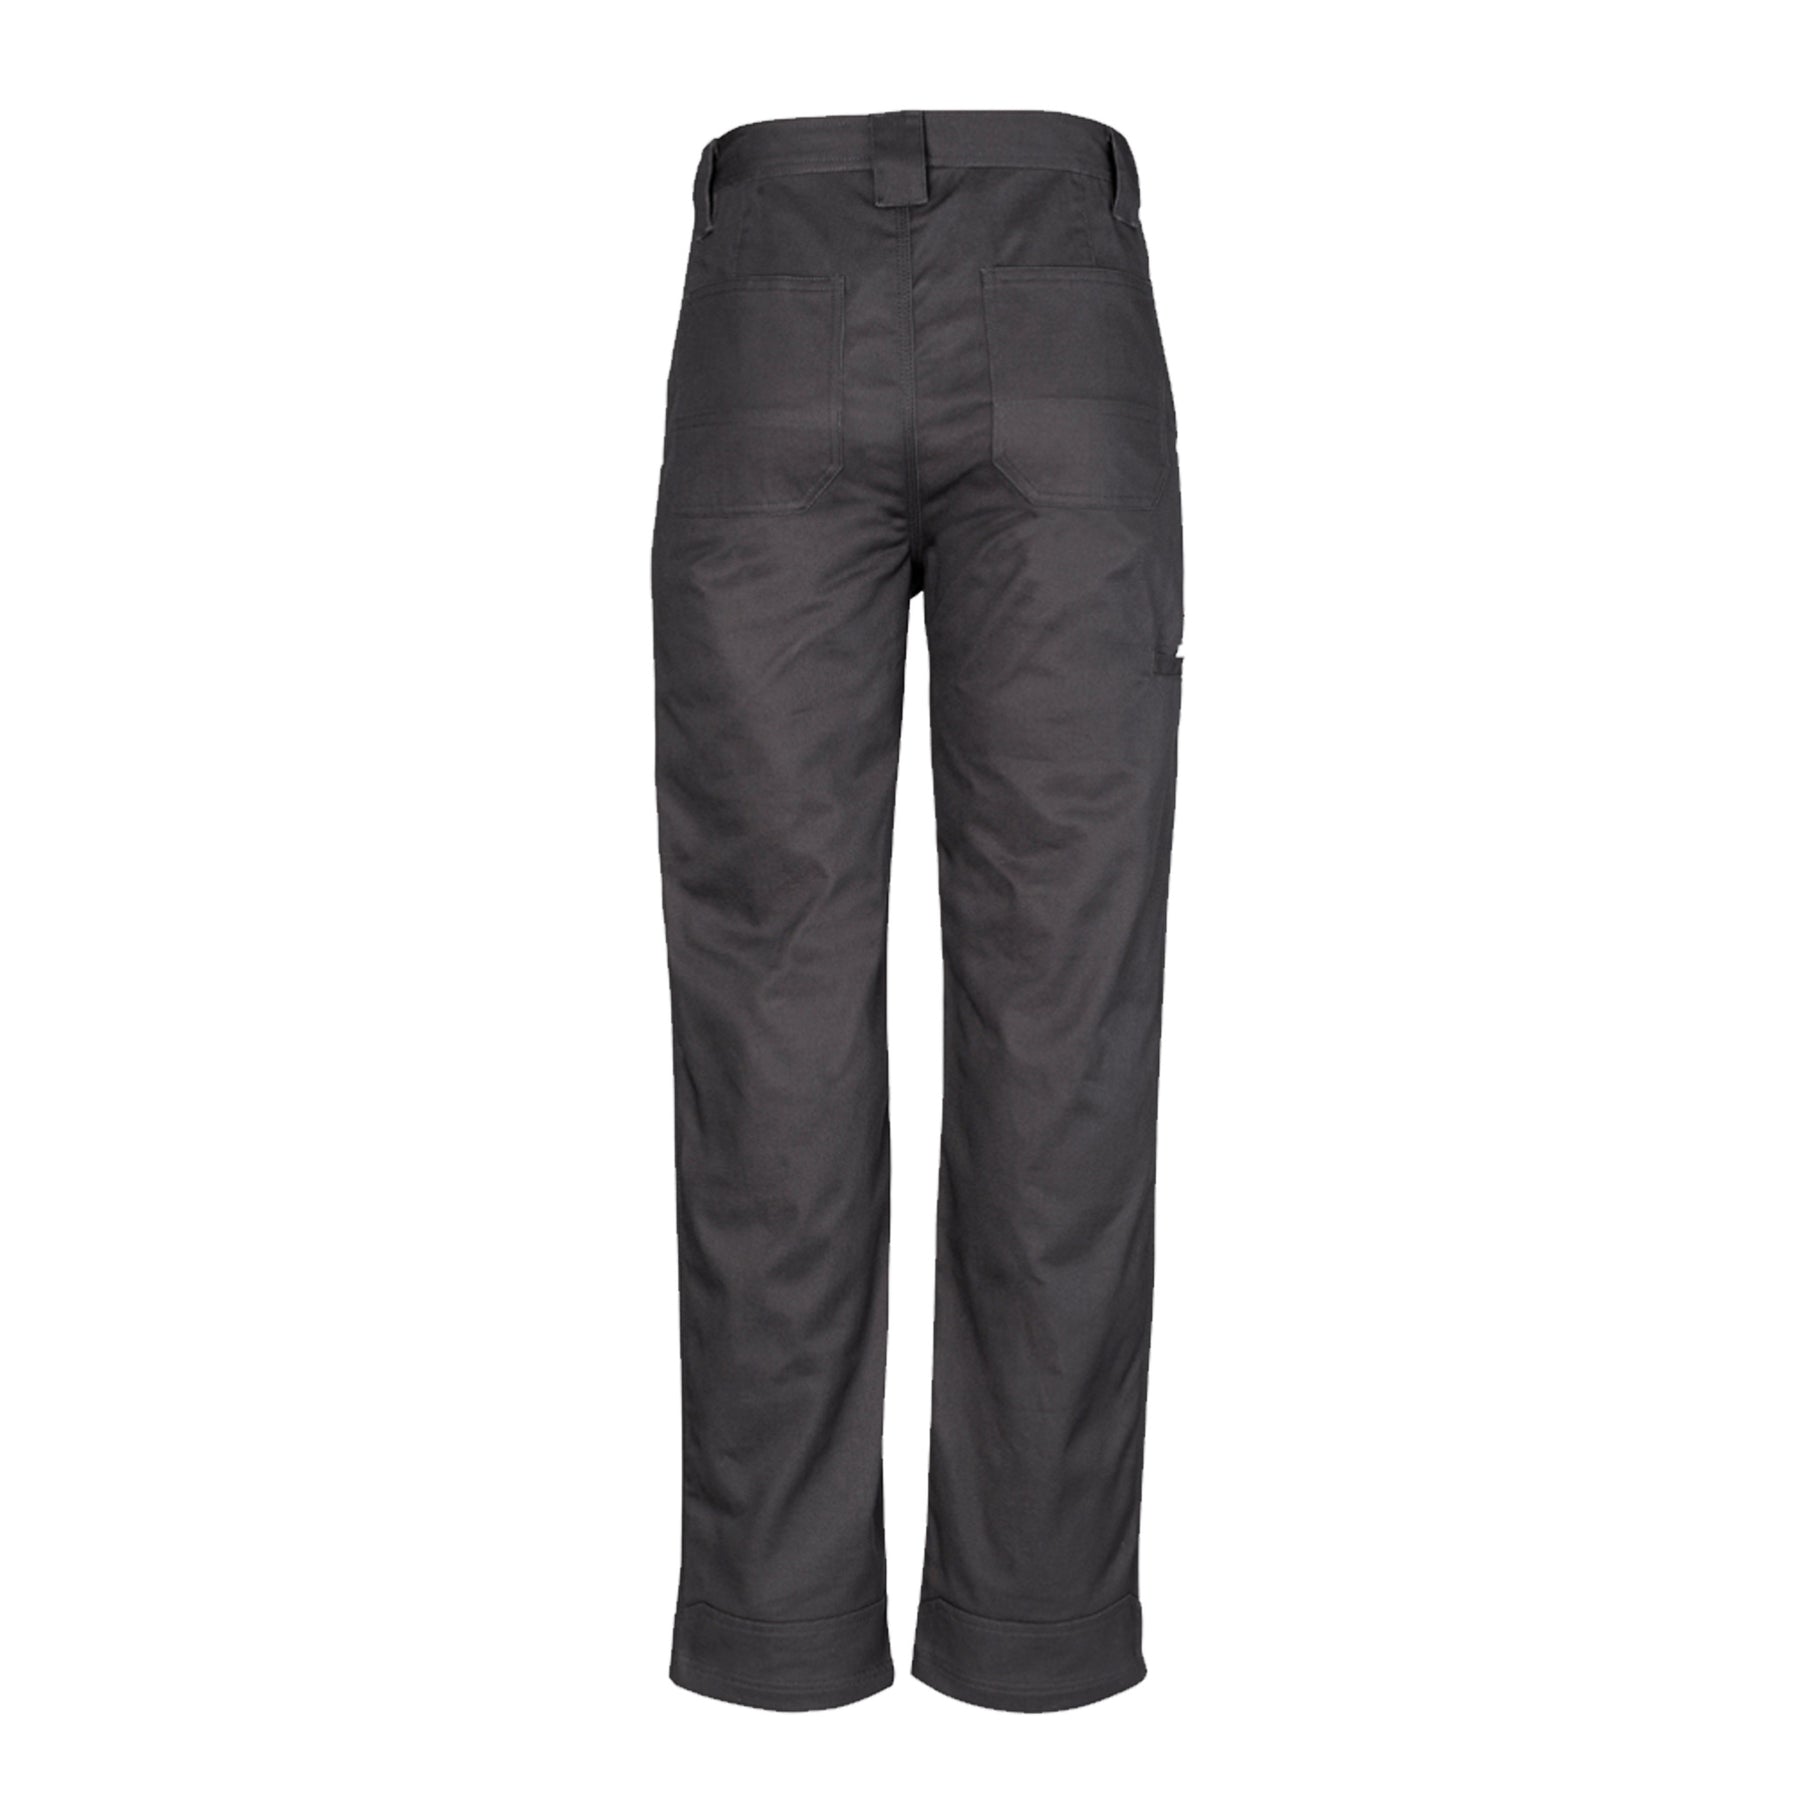 back of plain utility pant in charcoal